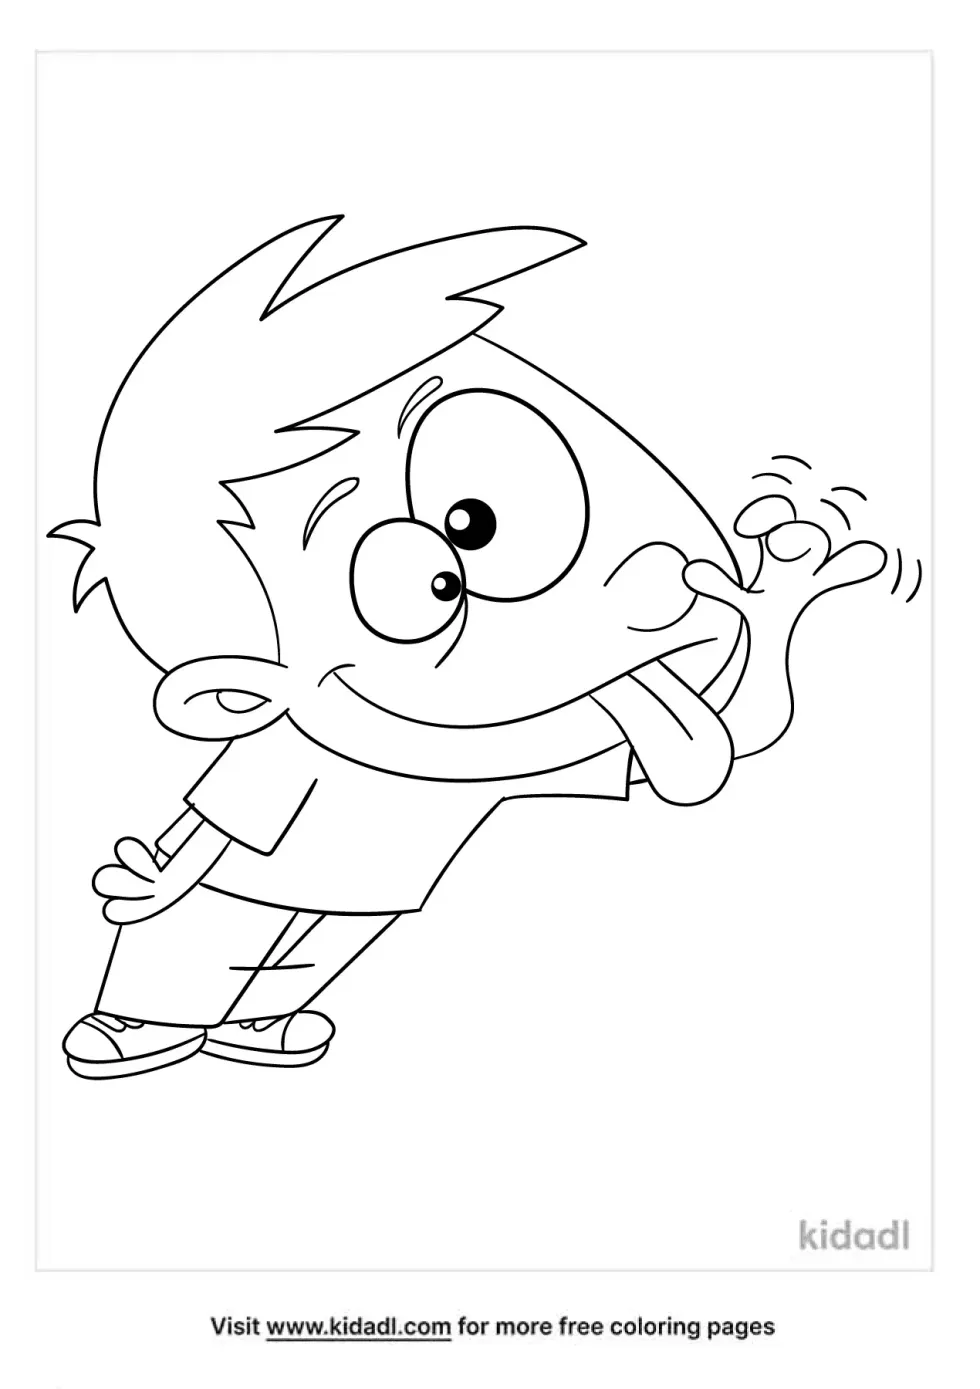 Silly Face Coloring Page